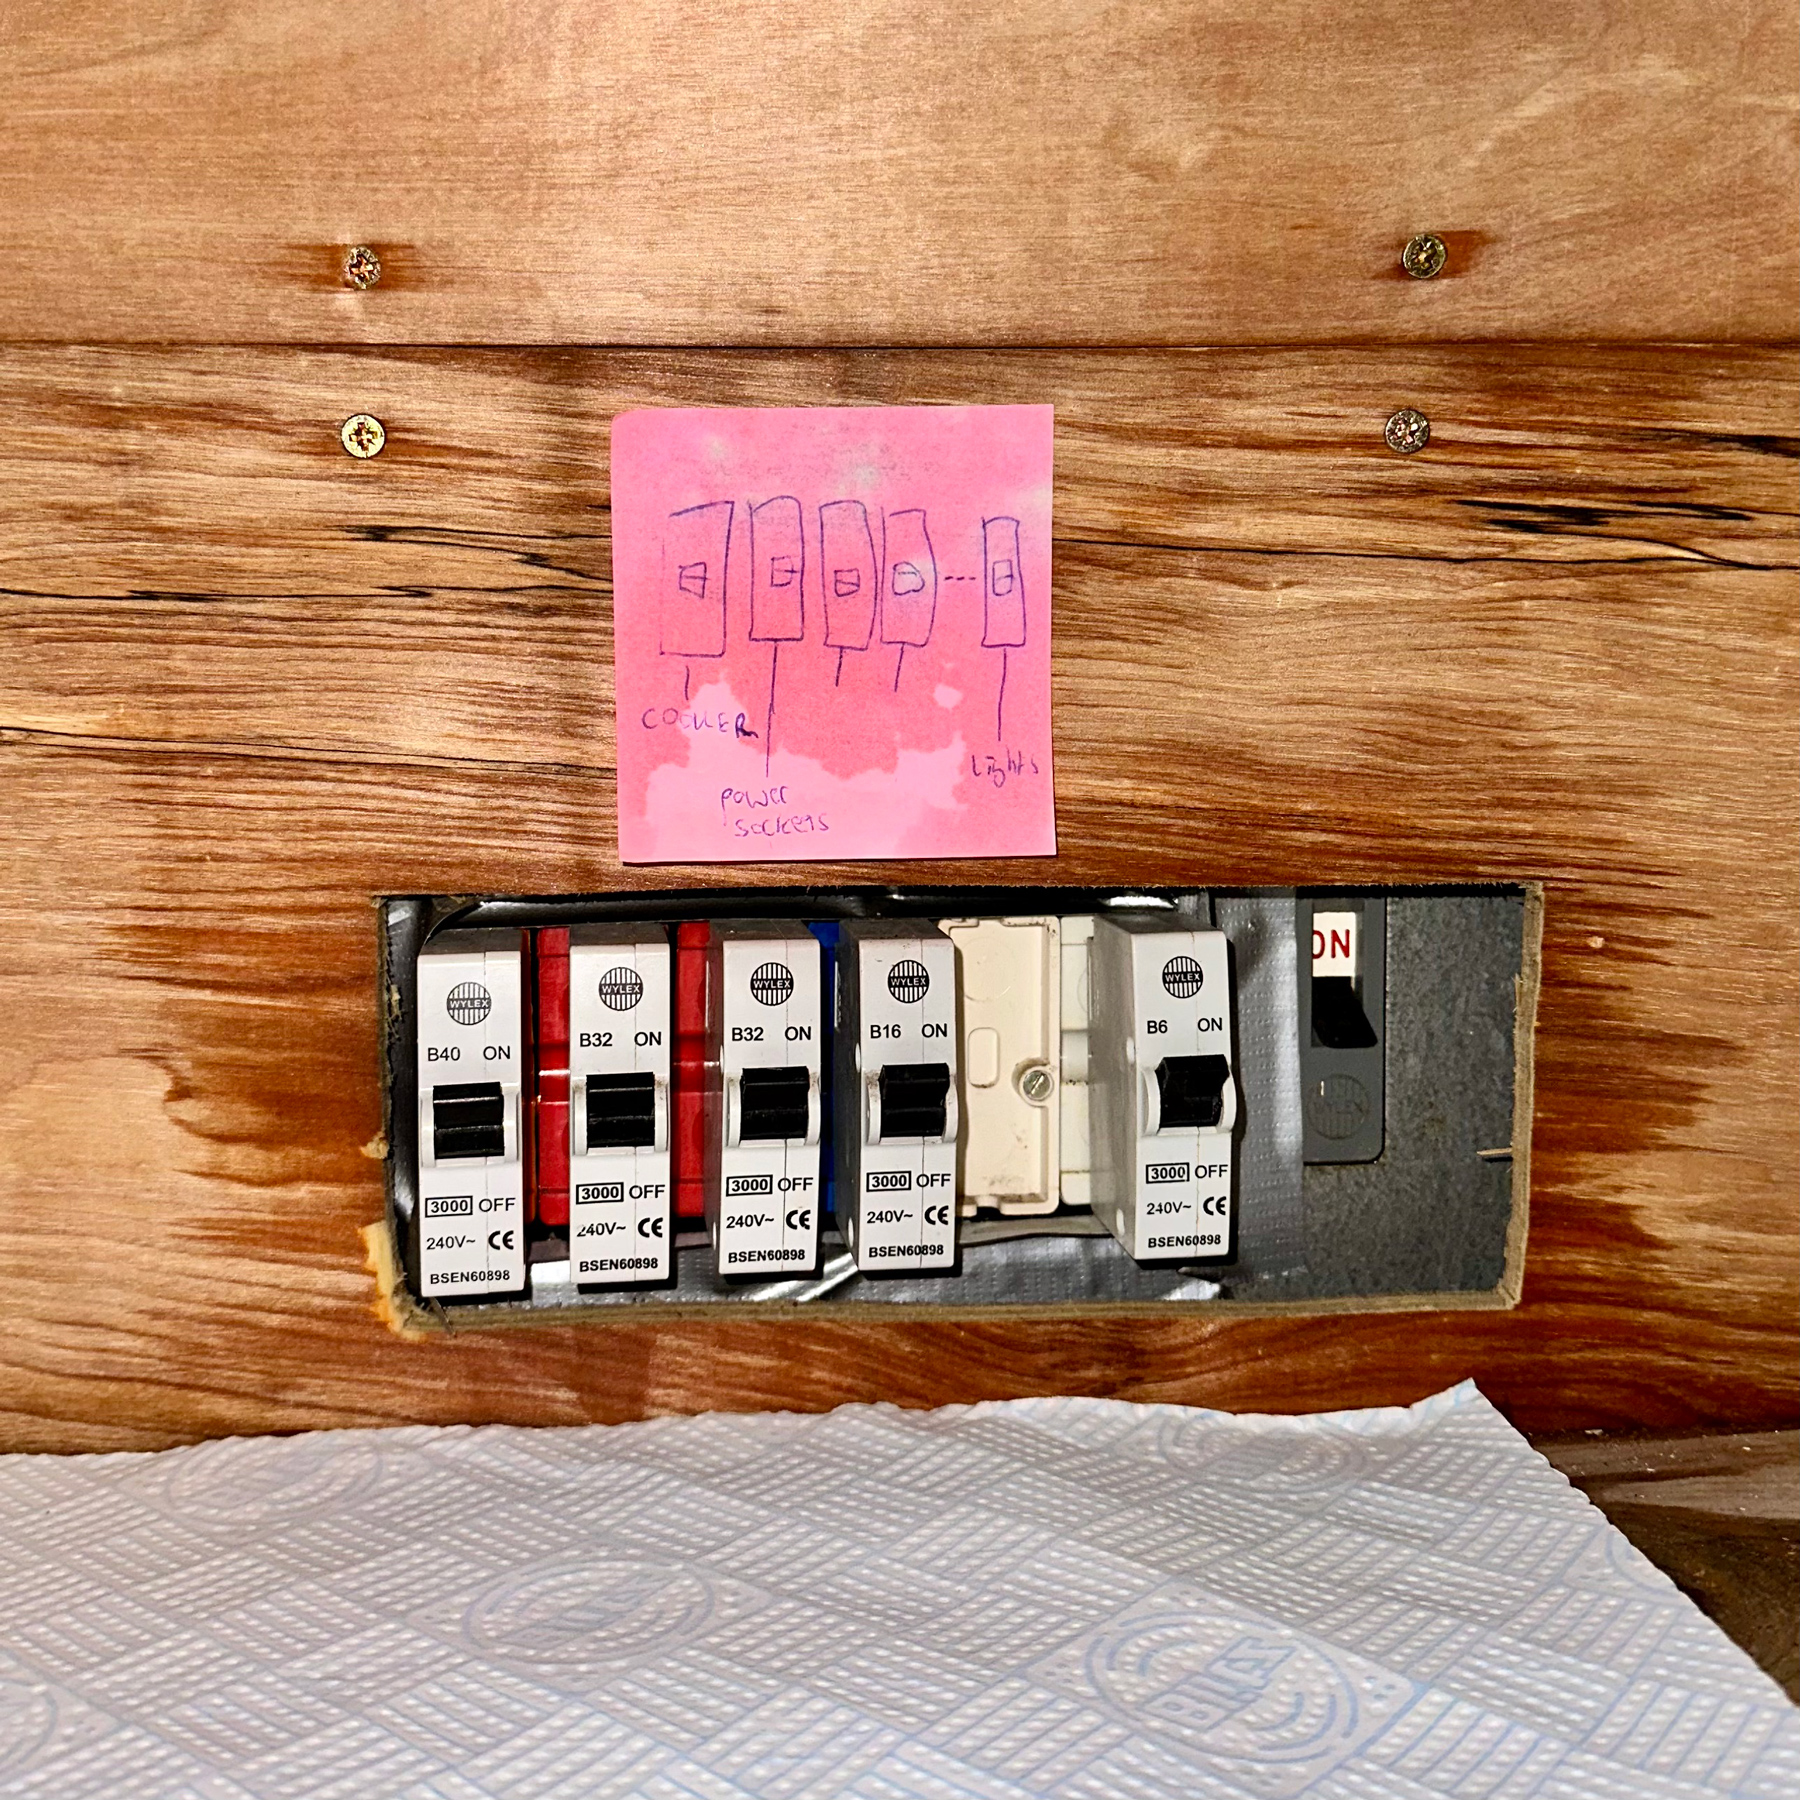 Some electrical switches surrounded by slightly damp wood and a post-it note that's clearly seen some water recently